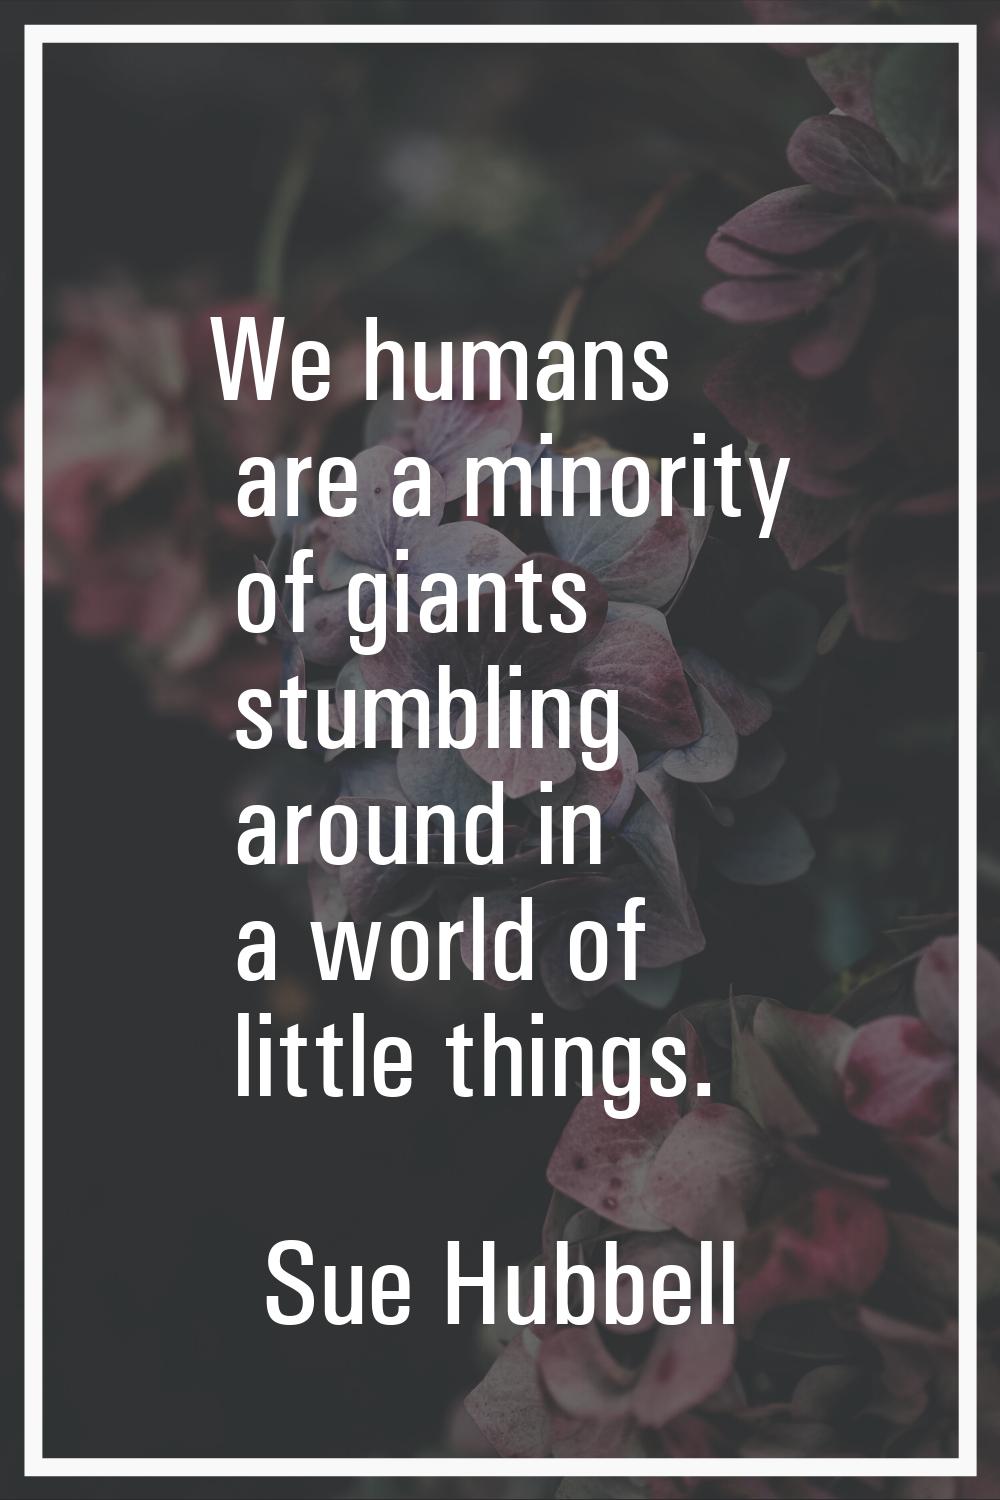 We humans are a minority of giants stumbling around in a world of little things.